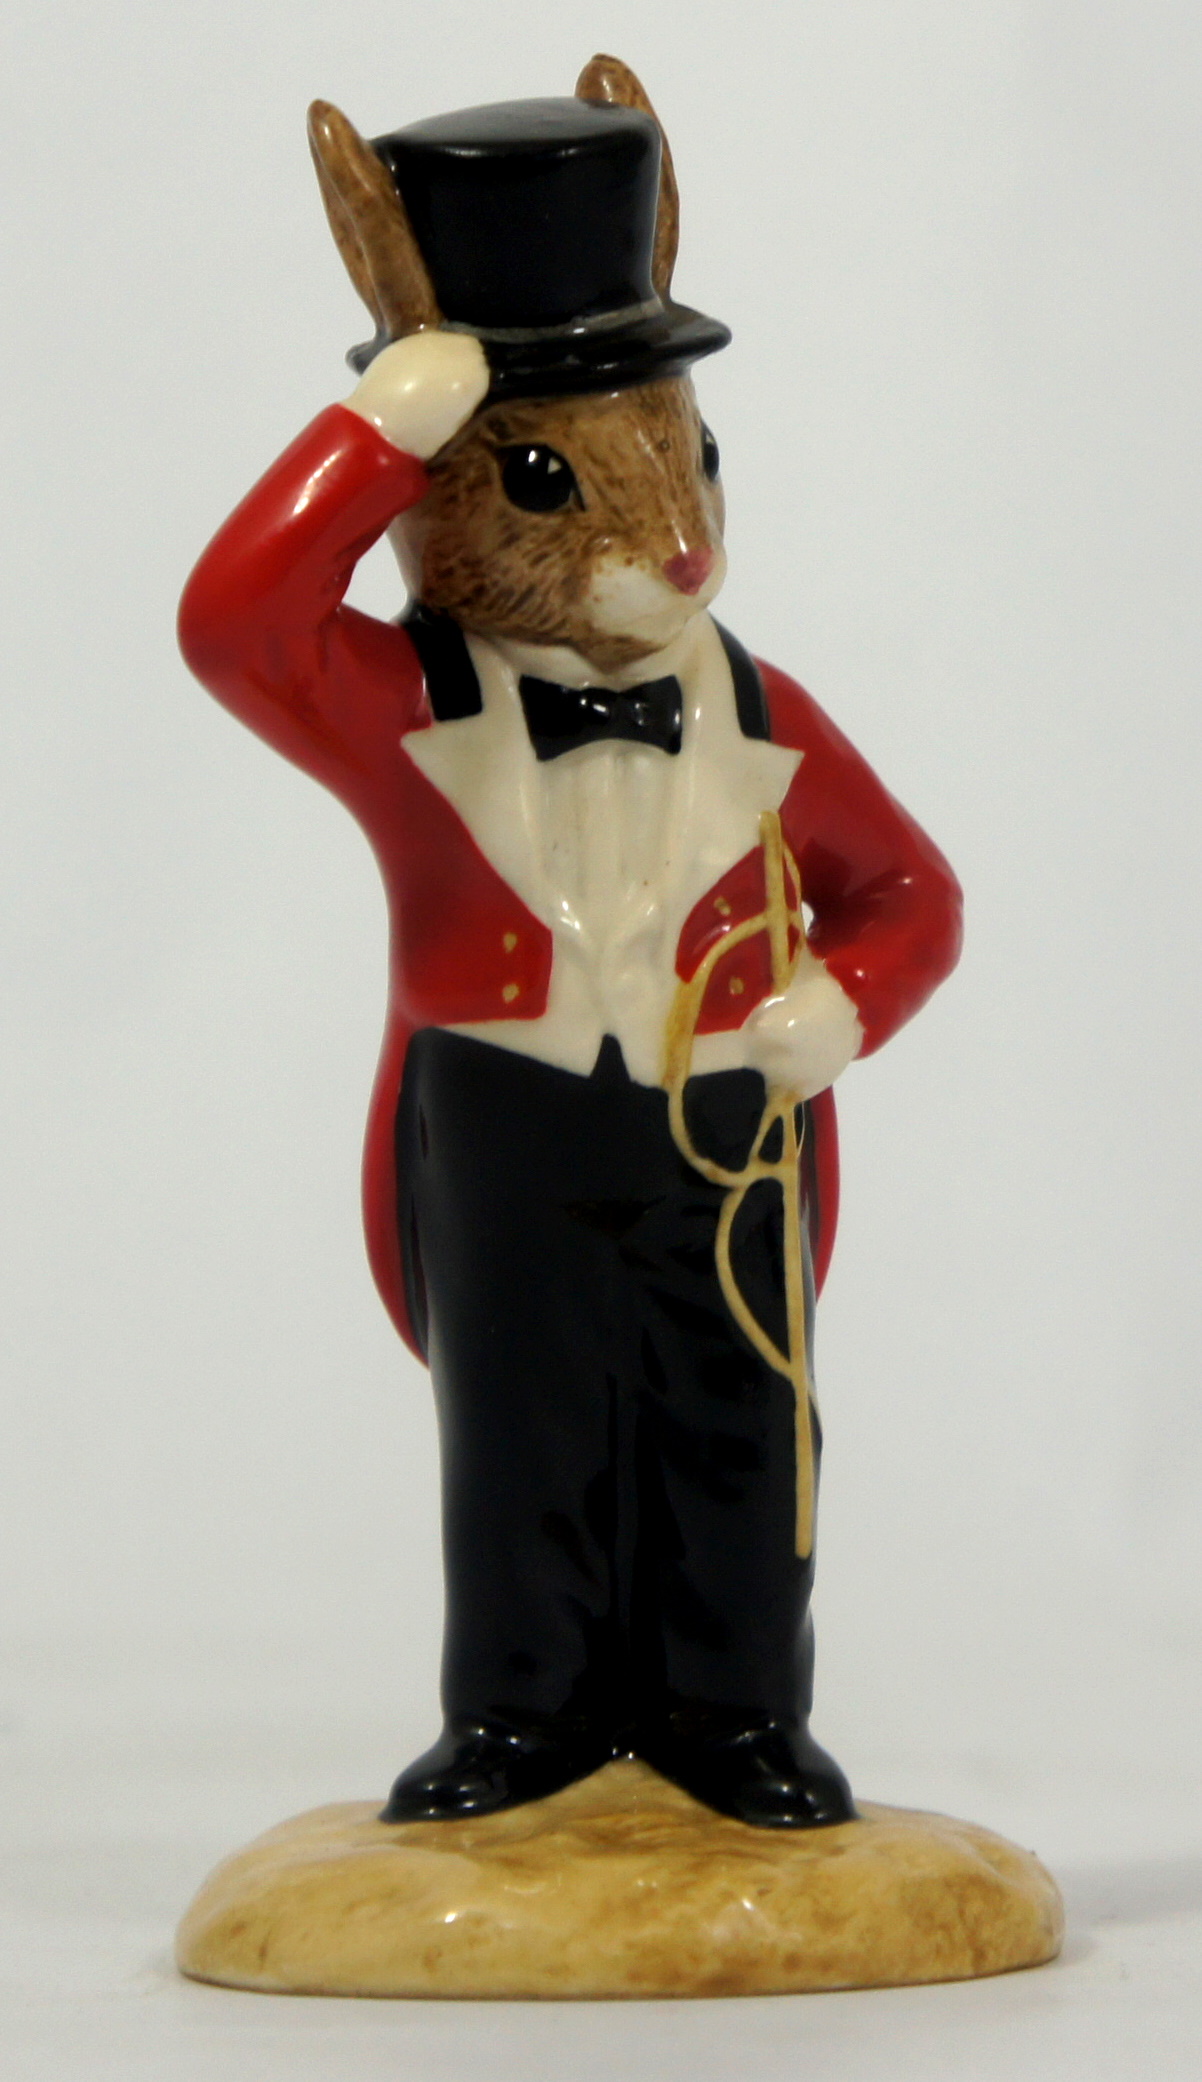 Royal Doulton Bunnykins Figure Ringmaster DB165 limited edition for UKI ceramics boxed with